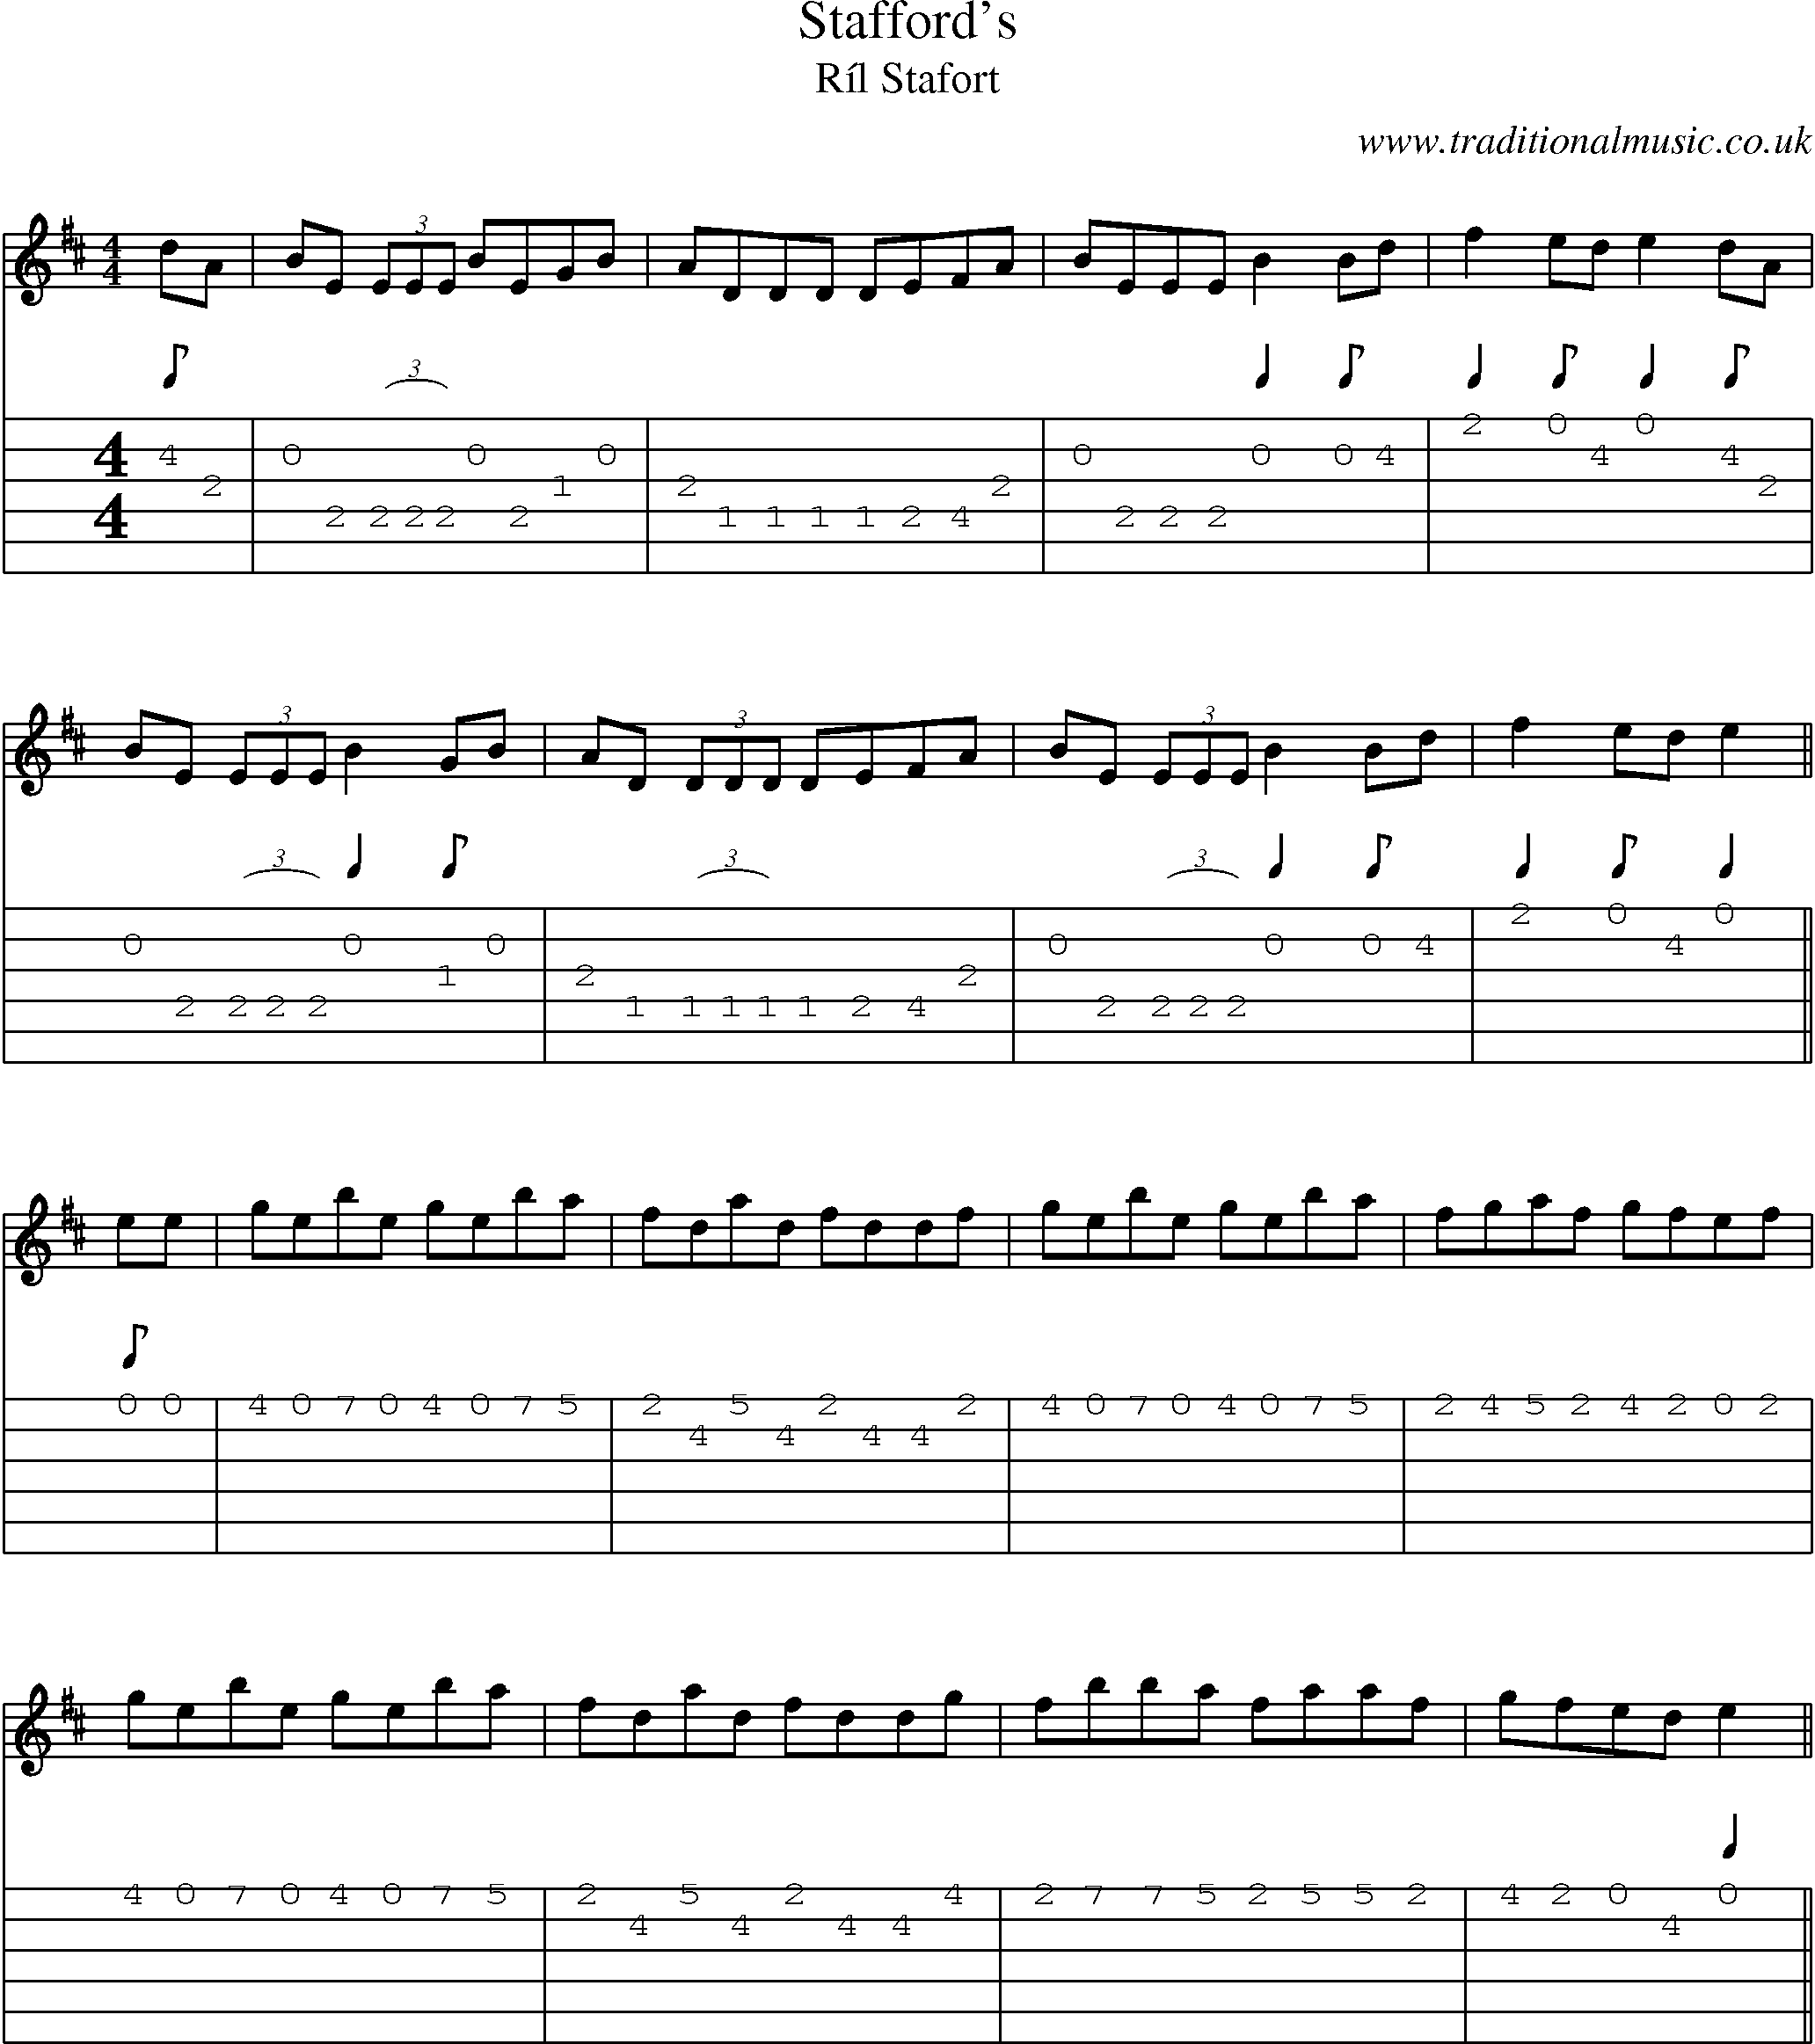 Music Score and Guitar Tabs for Staffords